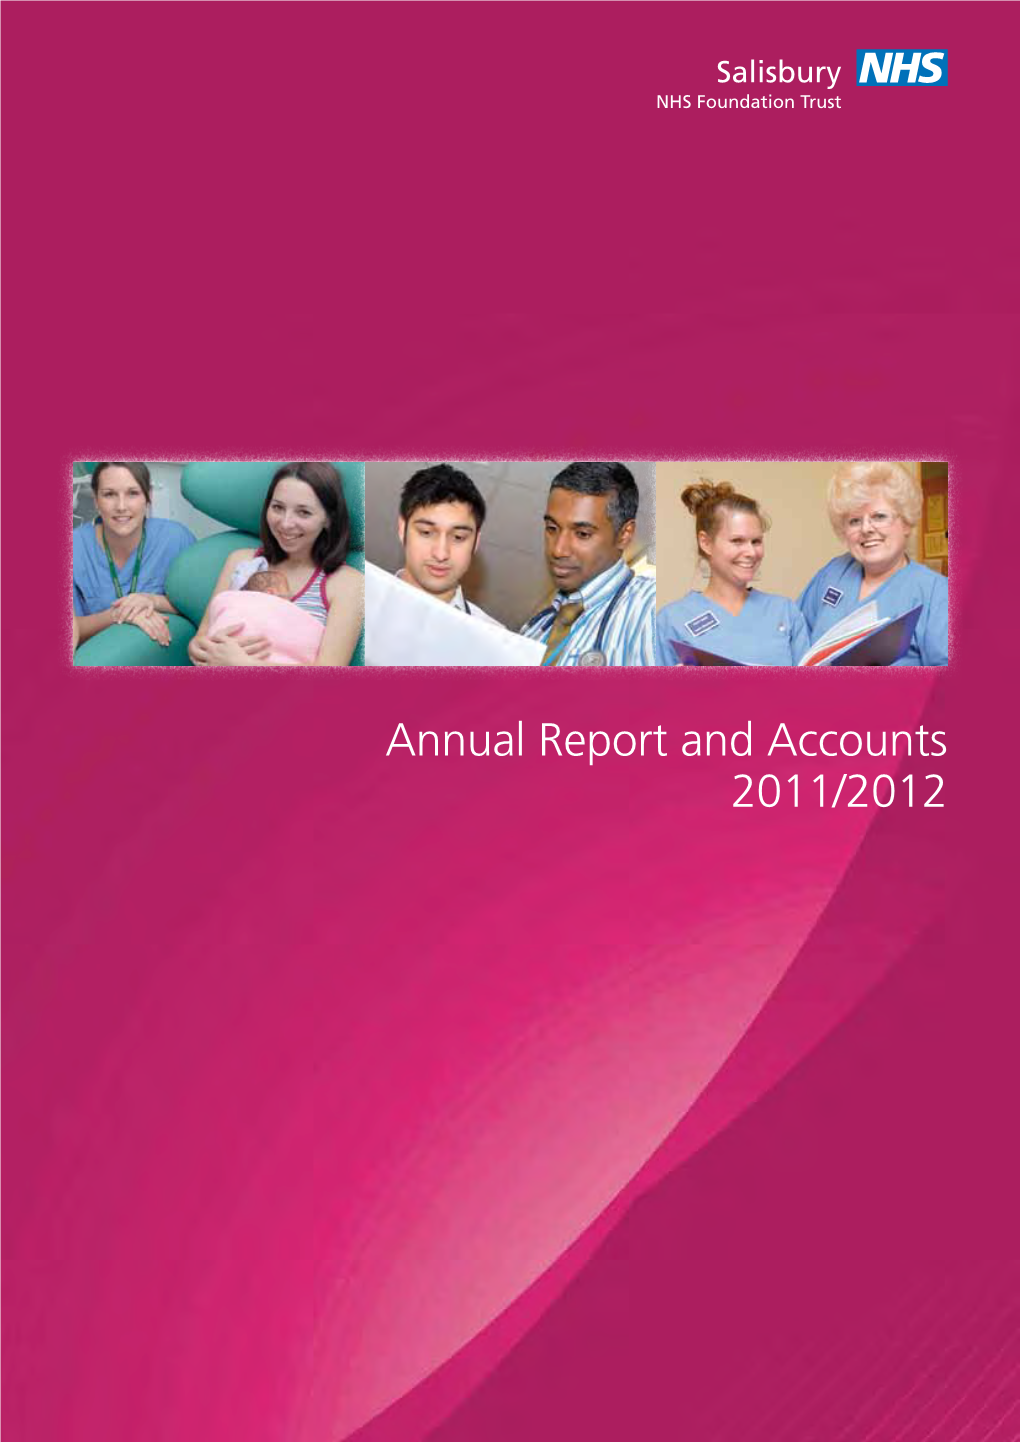 Annual Report and Accounts 2011/2012